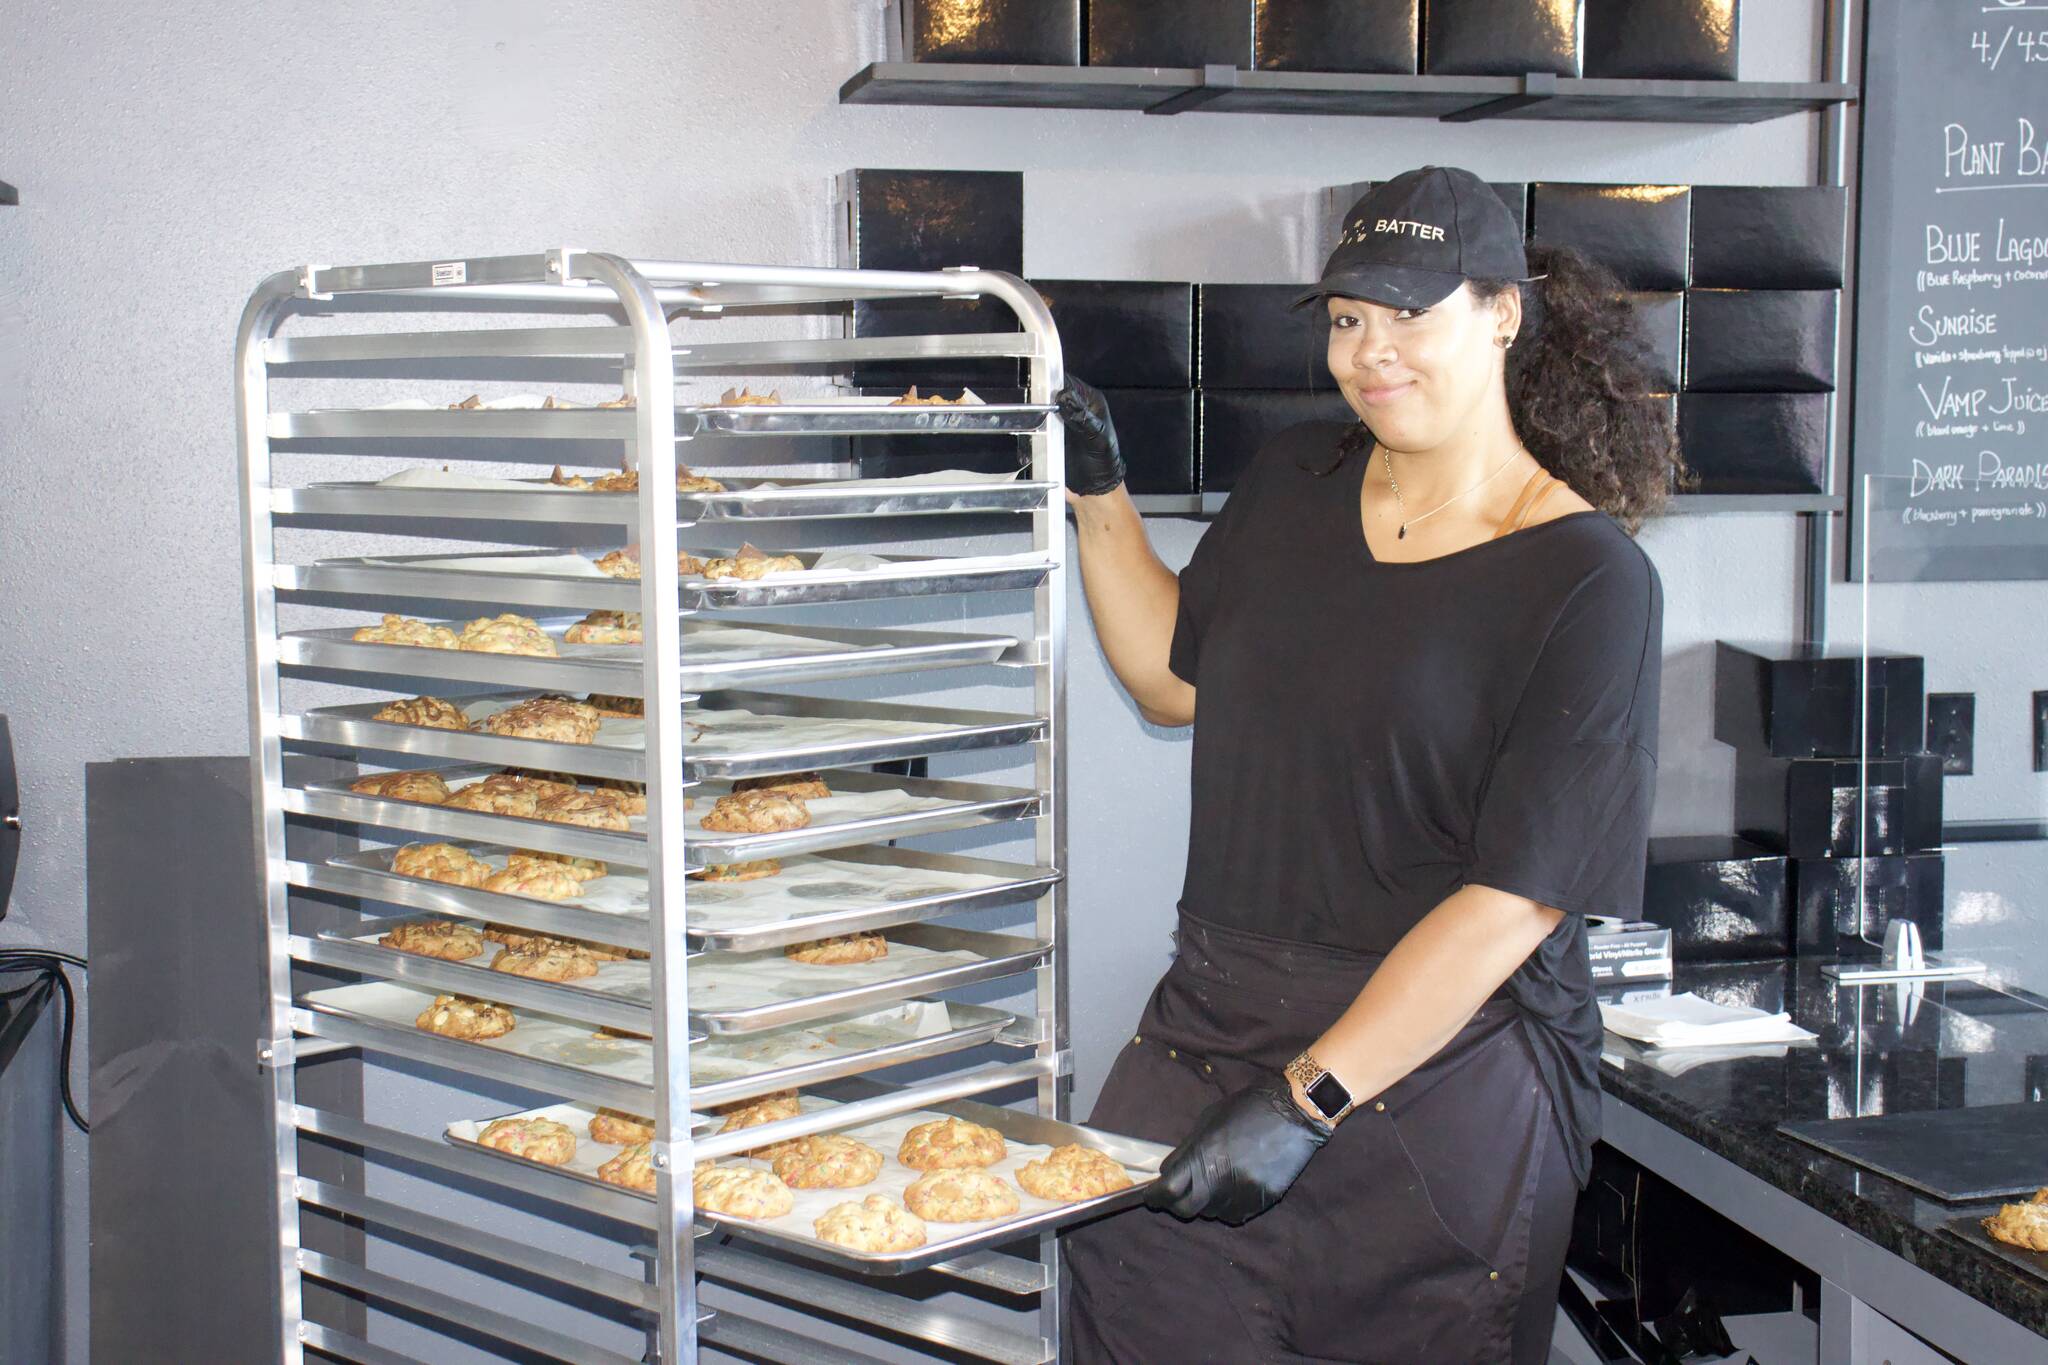 Photo by Rachel Rosen/Whidbey News-Times
Asianna Covington works the front of house at Mad Batter Bakehouse. She calls her sister Autumn the “head baker.”